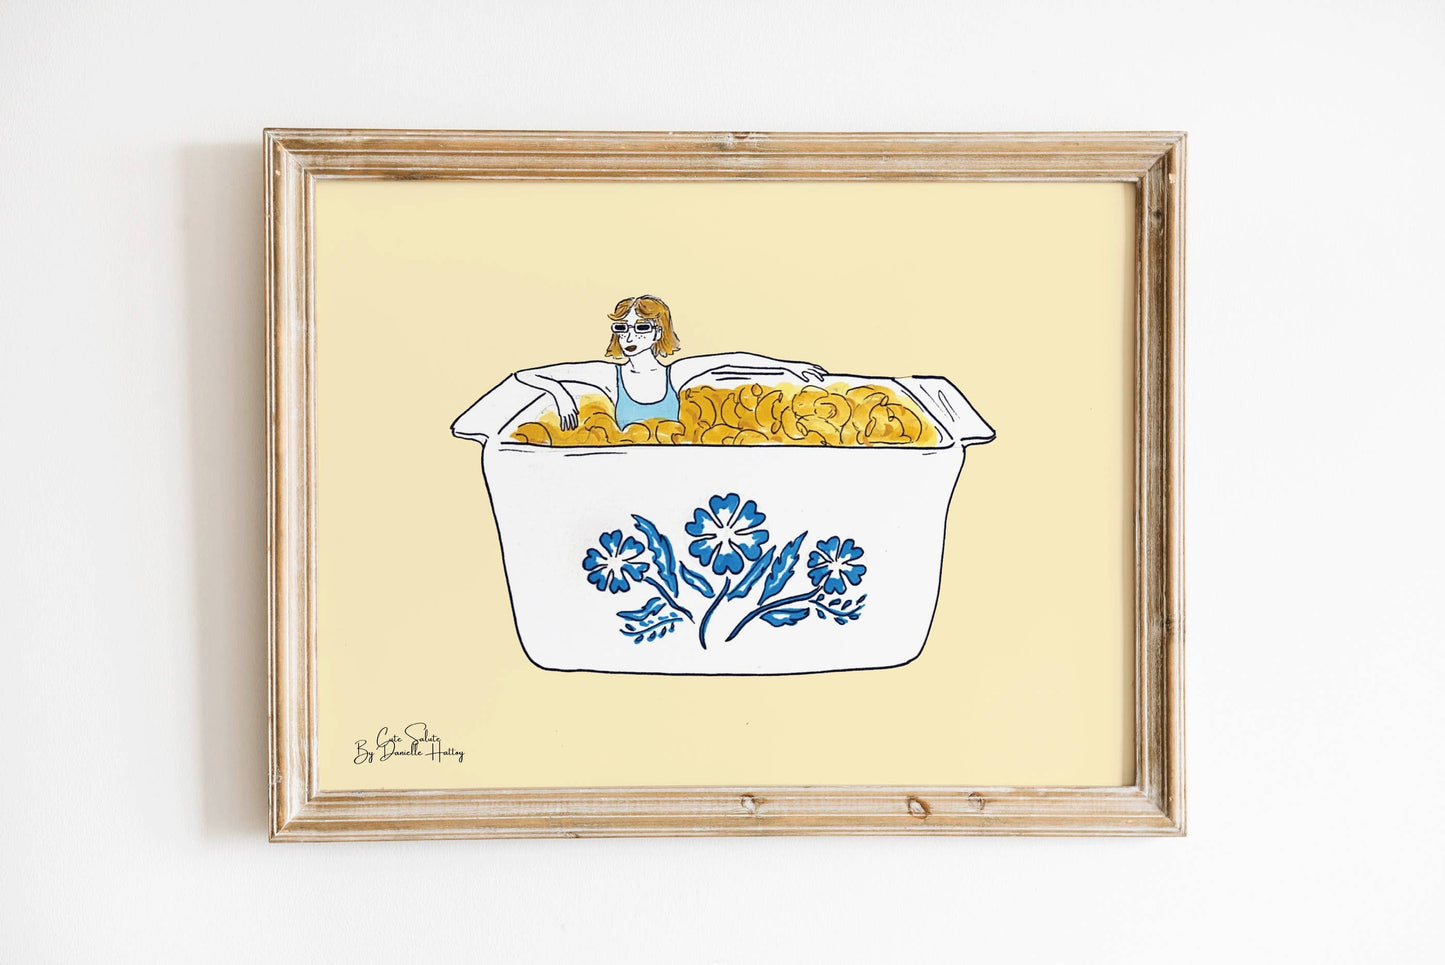 Wall print featuring an illustration of a girl sitting in a vintage CorningWare dish of Mac and Cheese with a pale yellow background. Shown in light colored wood frame.